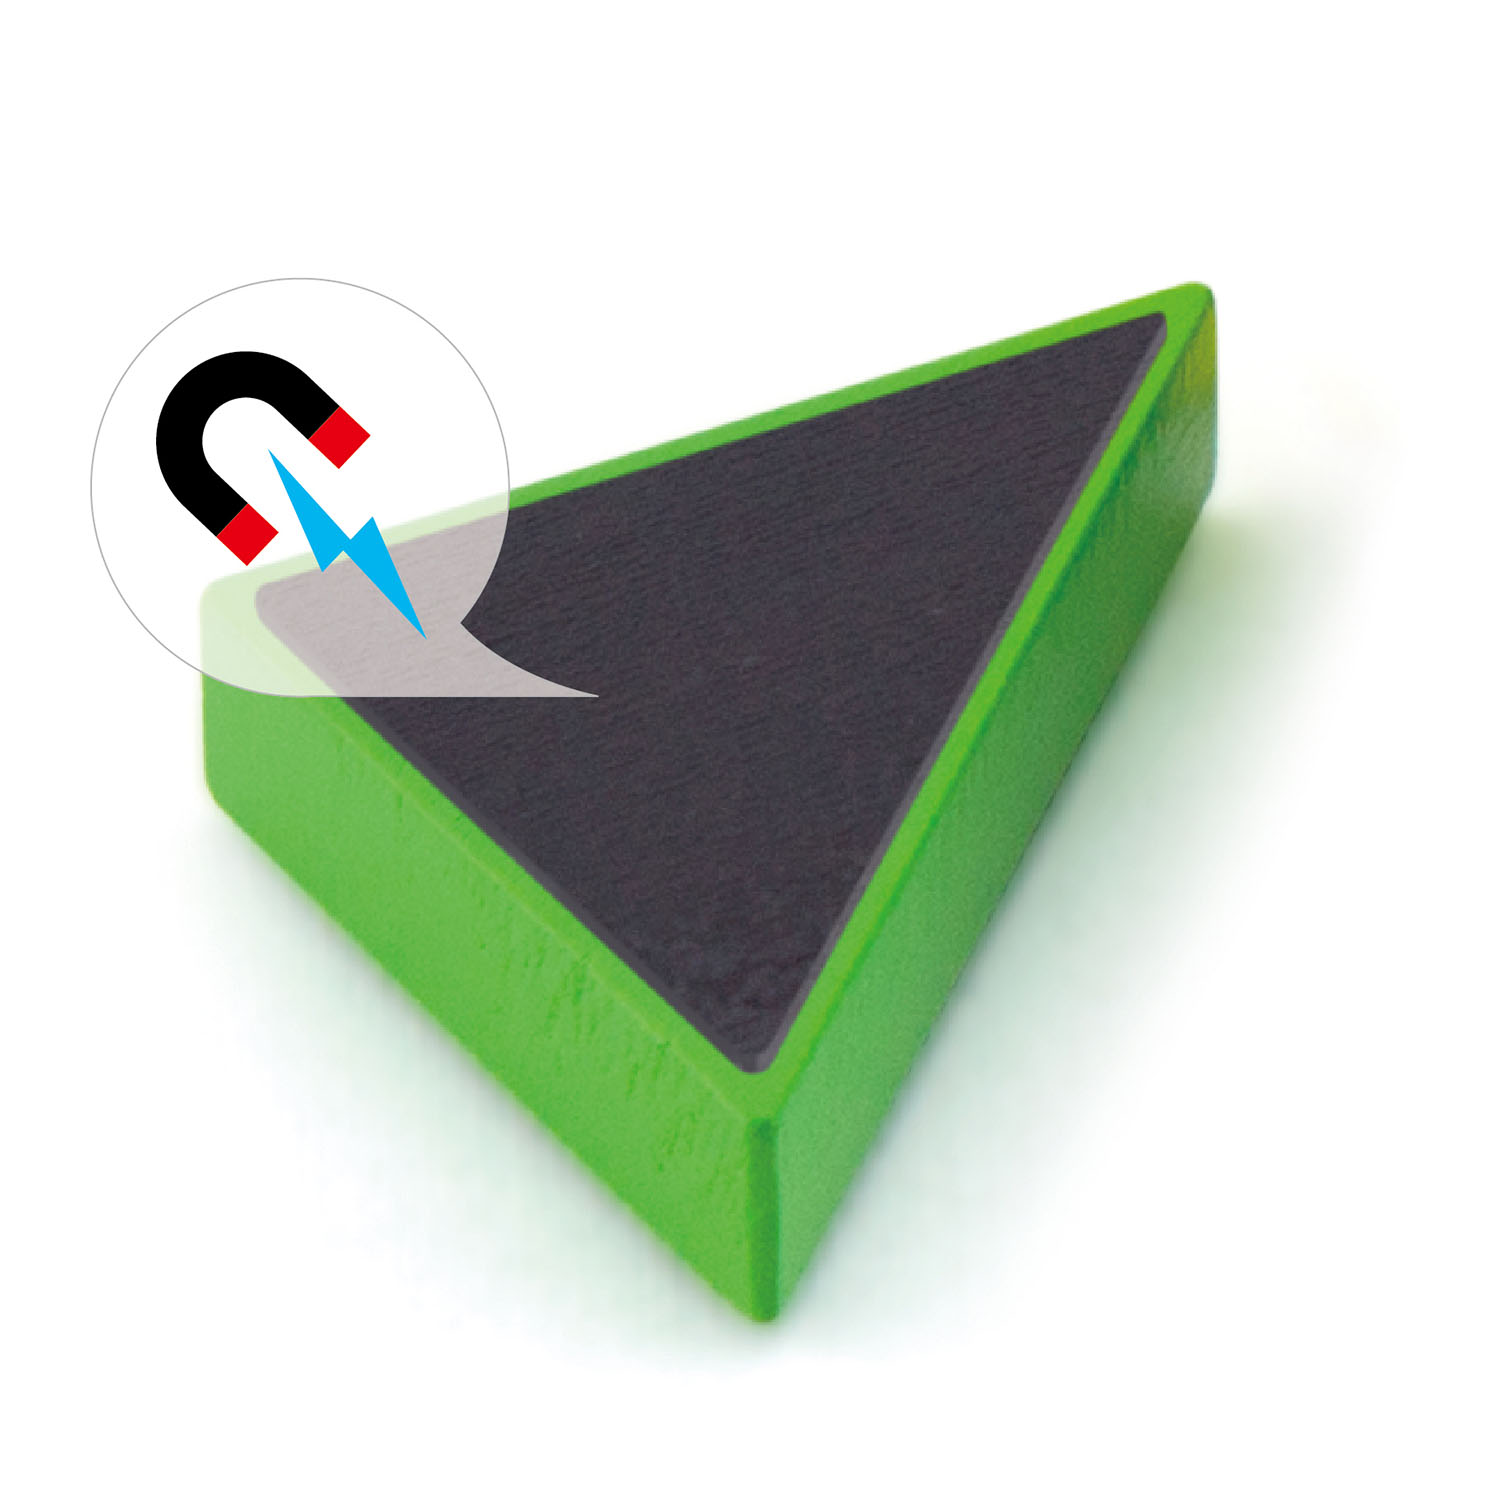 the magnet under the tangram piece